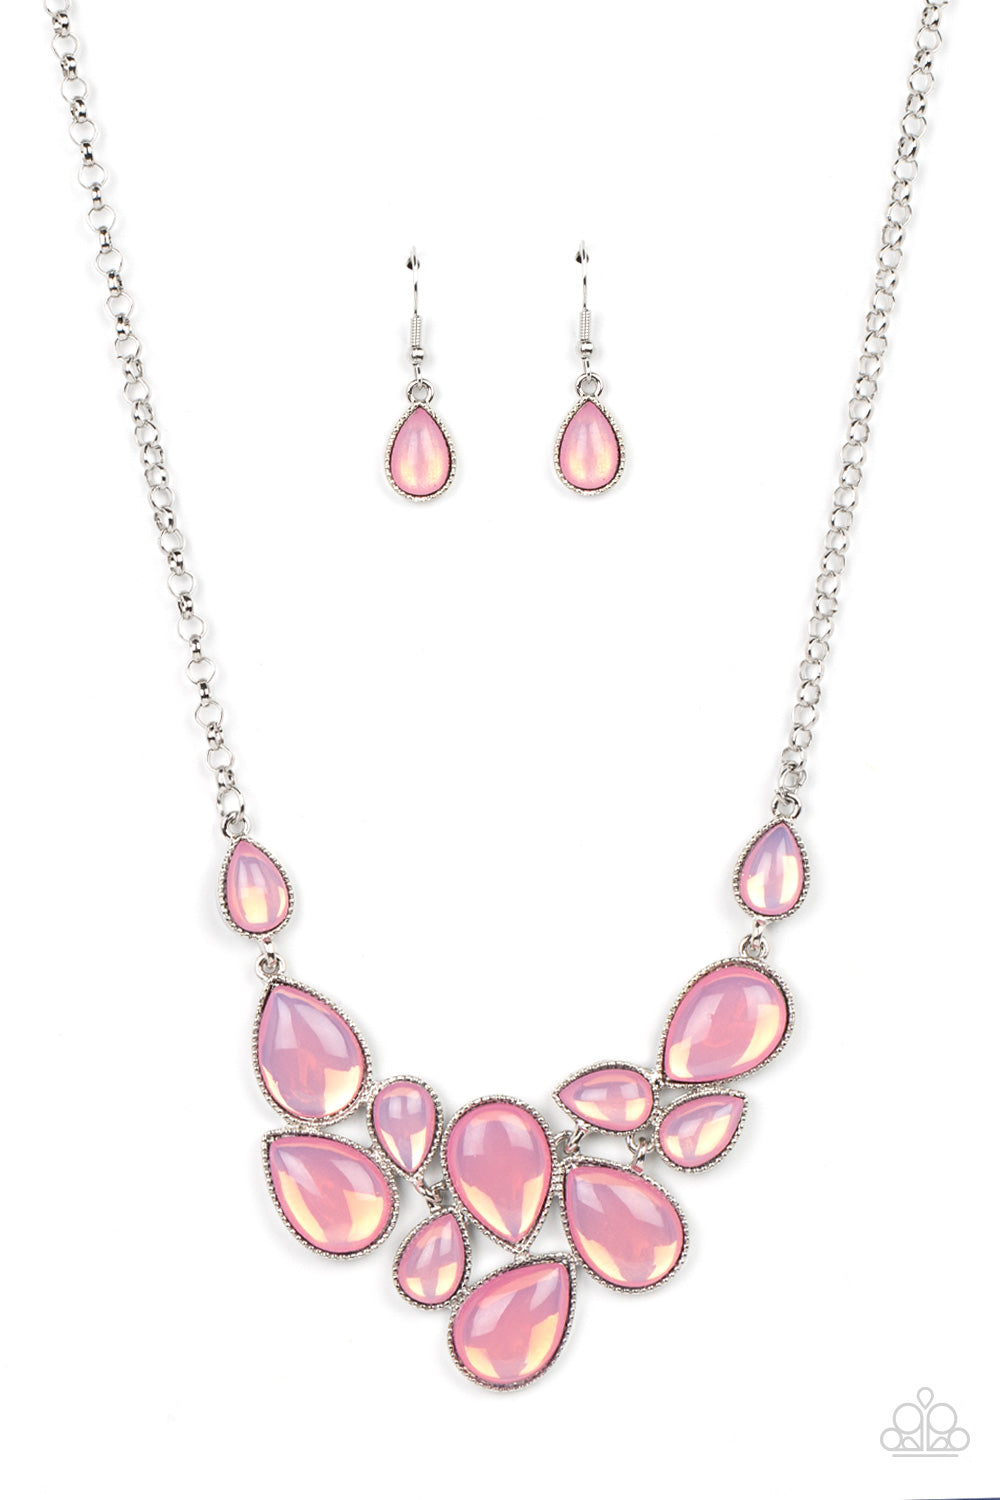 Paparazzi Accessories - Keeps GLOWING and GLOWING - Pink Necklaces a cascade of glassy opalescent pink teardrops are encased in studded silver frames, ultimately clustering below the collar to create an enchanting pop of color. Features an adjustable clasp closure.  Sold as one individual necklace. Includes one pair of matching earrings.